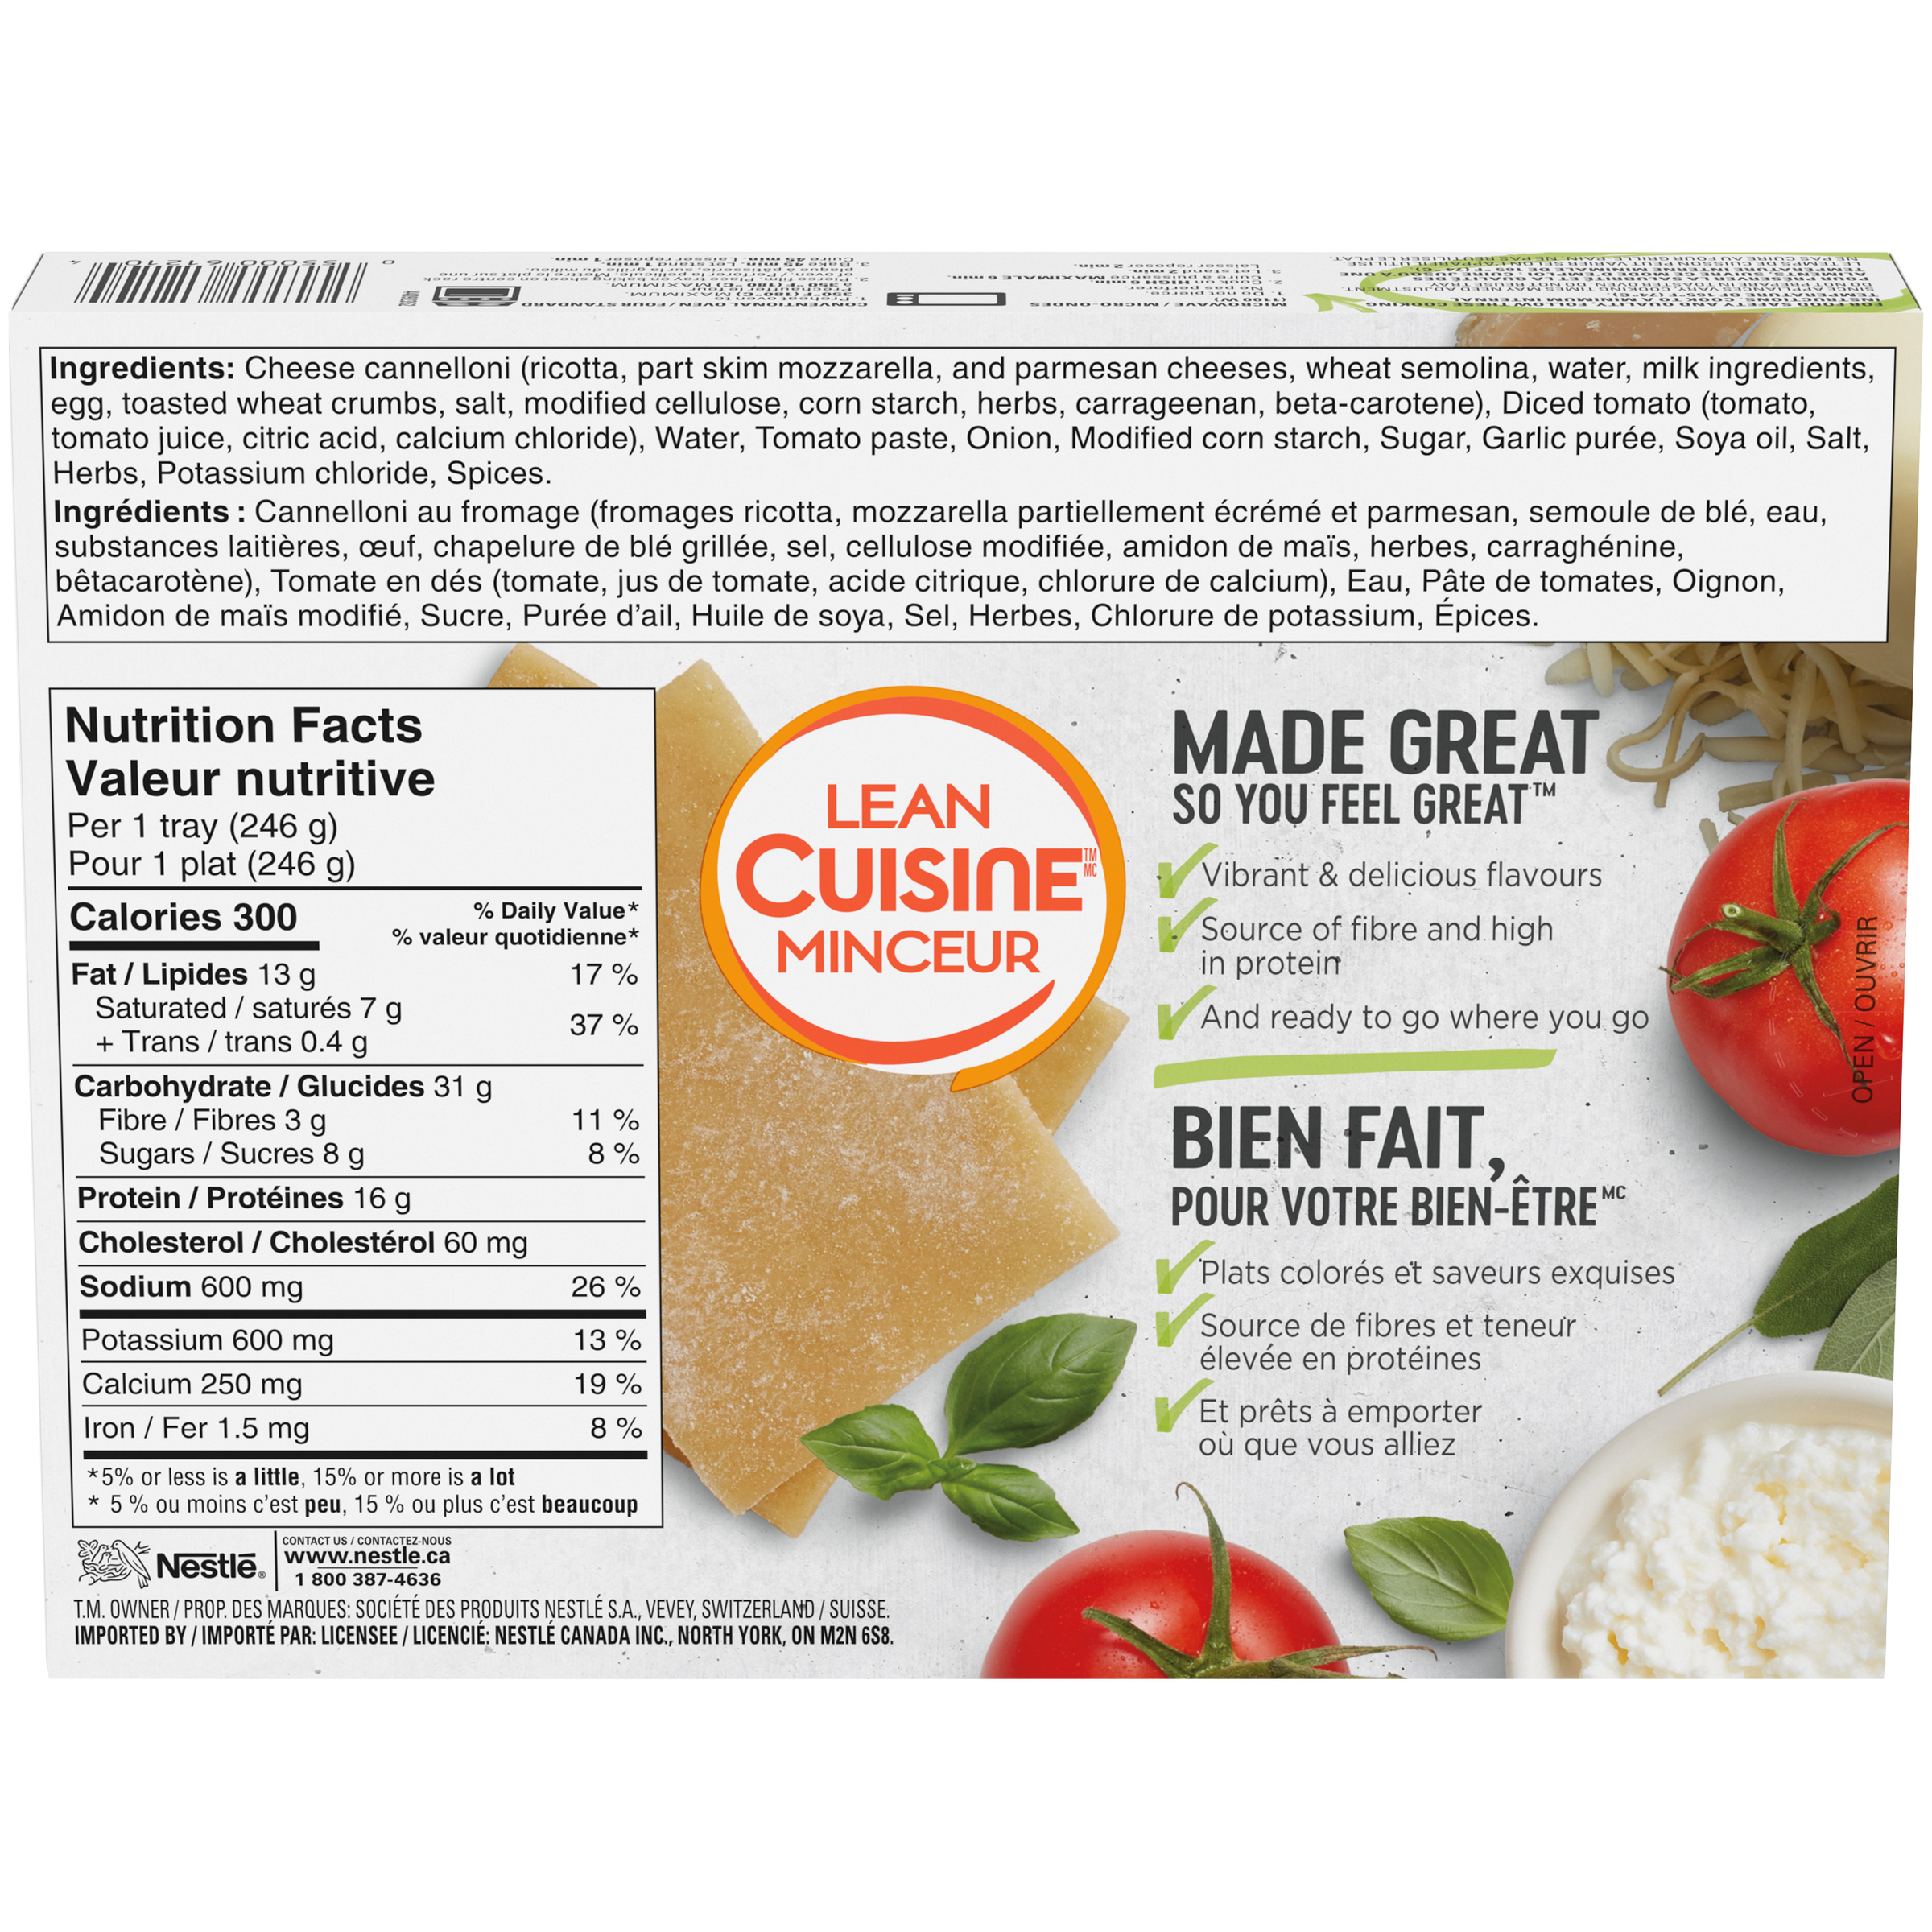 LEAN CUISINE Cheese Cannelloni back